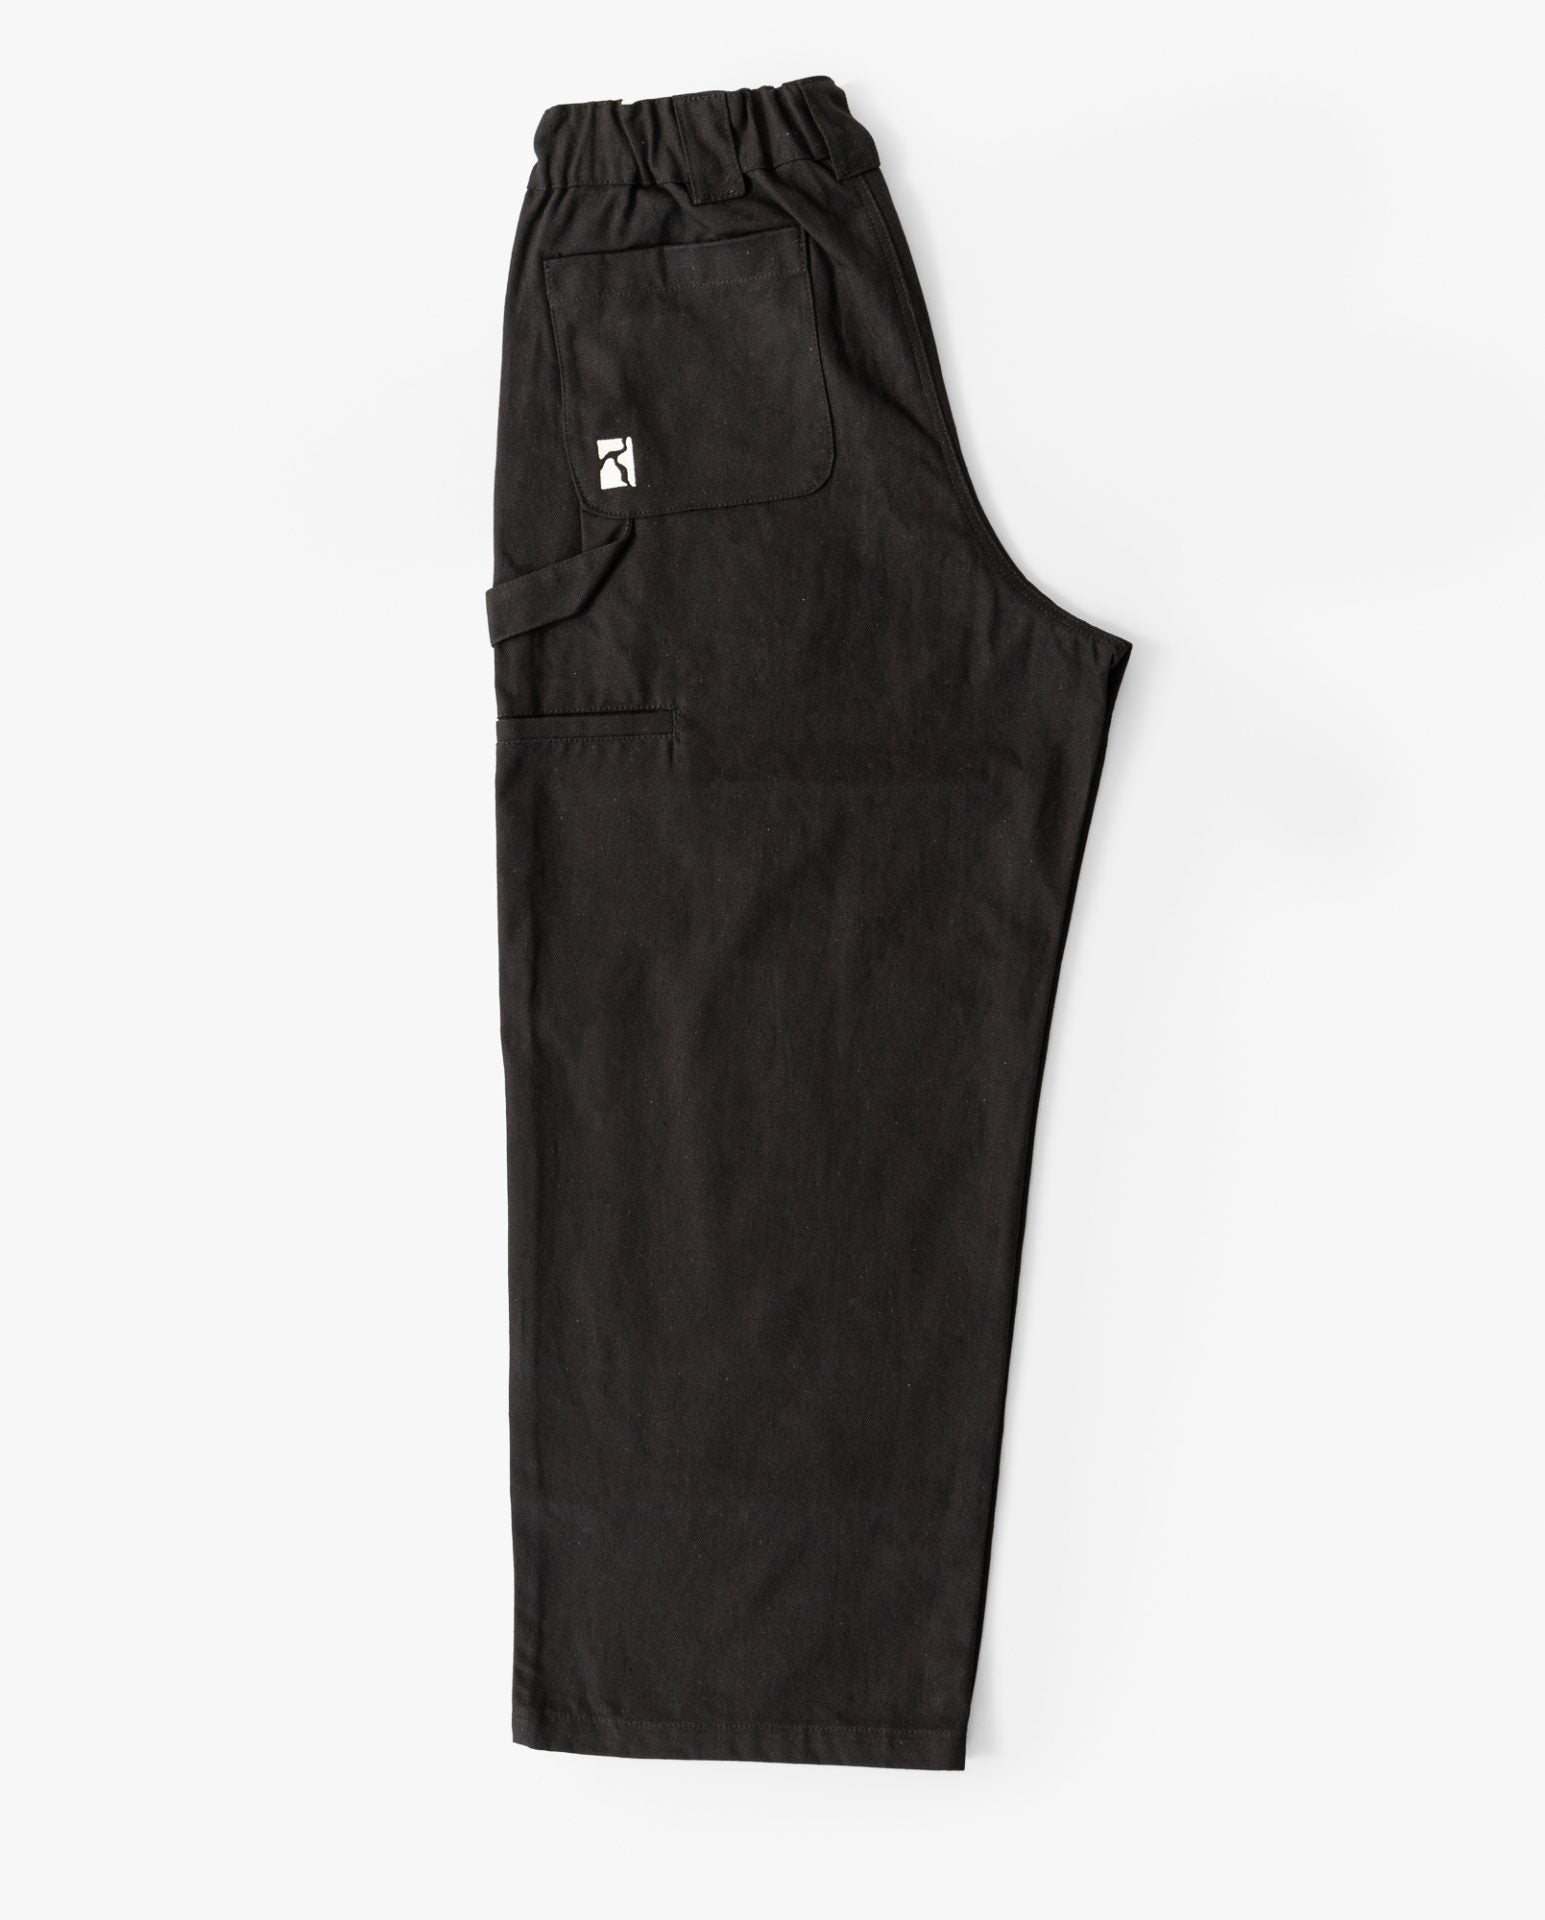 Poetic Collective Sculptor Pants - Olive / White Stitch